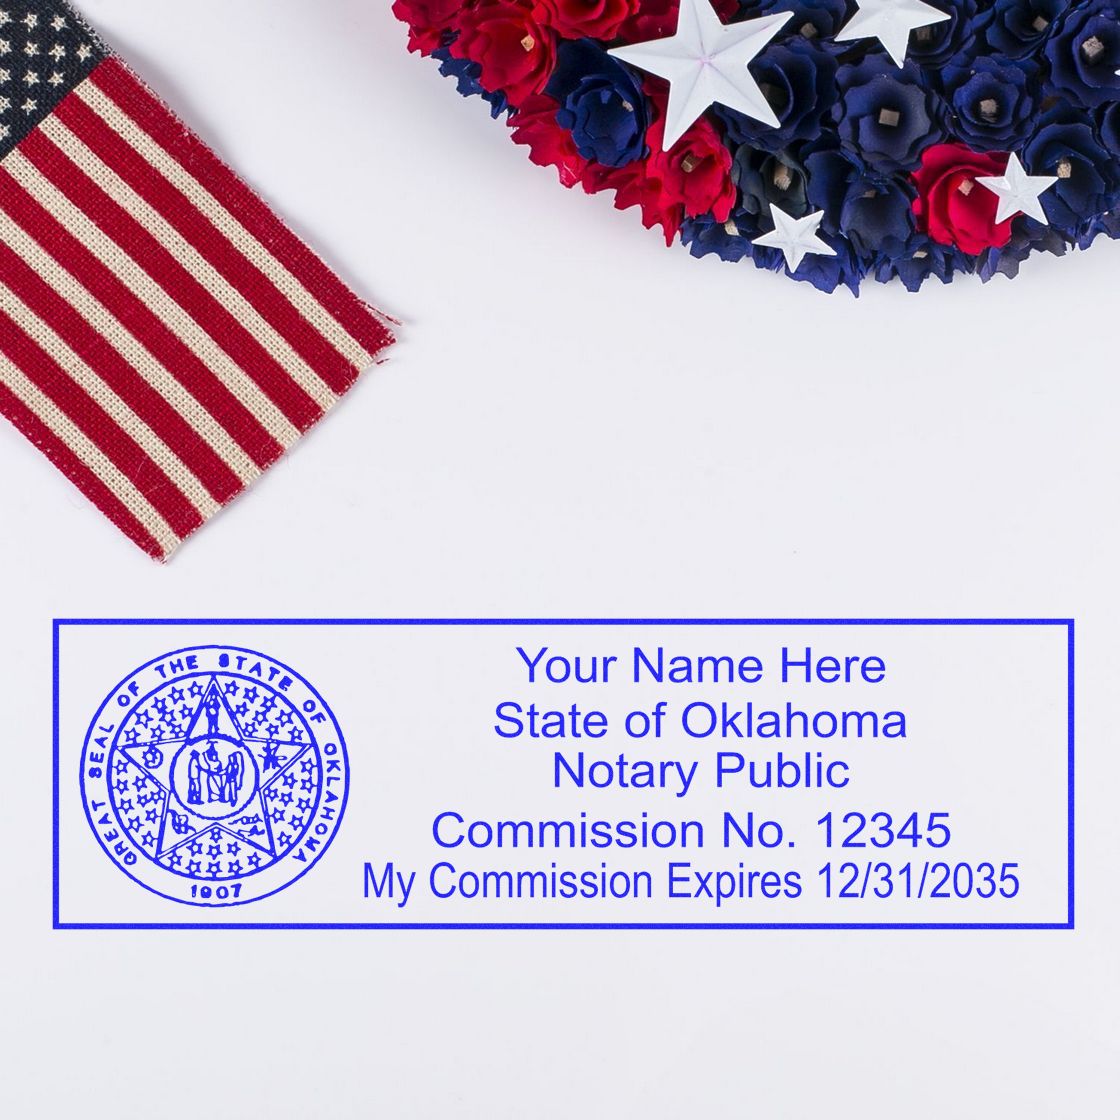 Slim Pre-Inked State Seal Notary Stamp for Oklahoma in use photo showing a stamped imprint of the Slim Pre-Inked State Seal Notary Stamp for Oklahoma